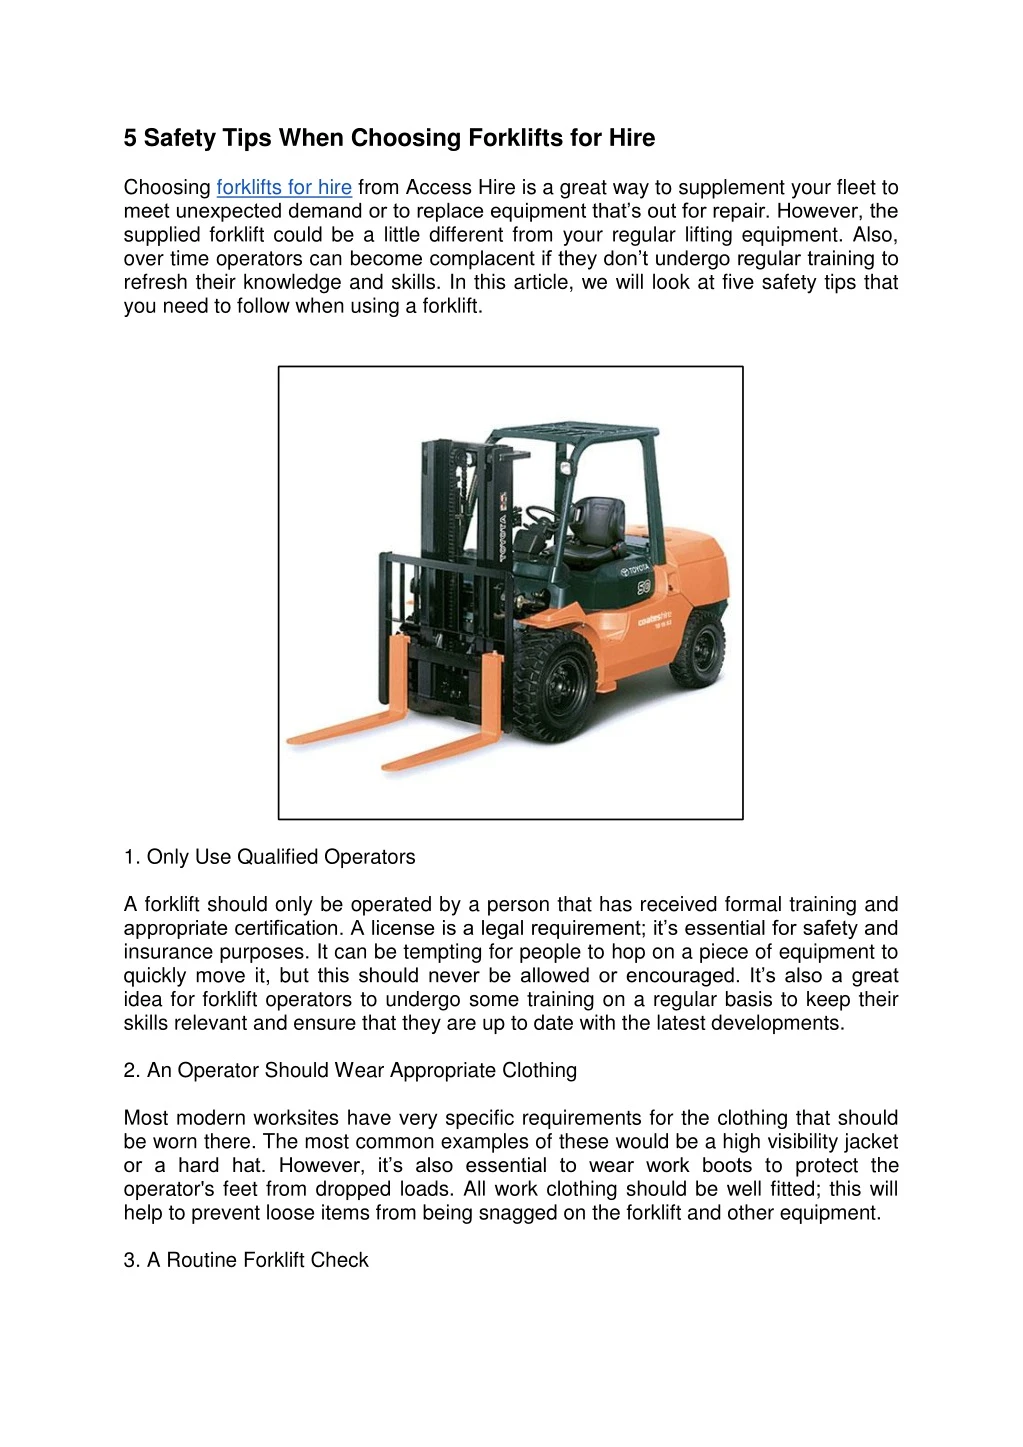 5 safety tips when choosing forklifts for hire